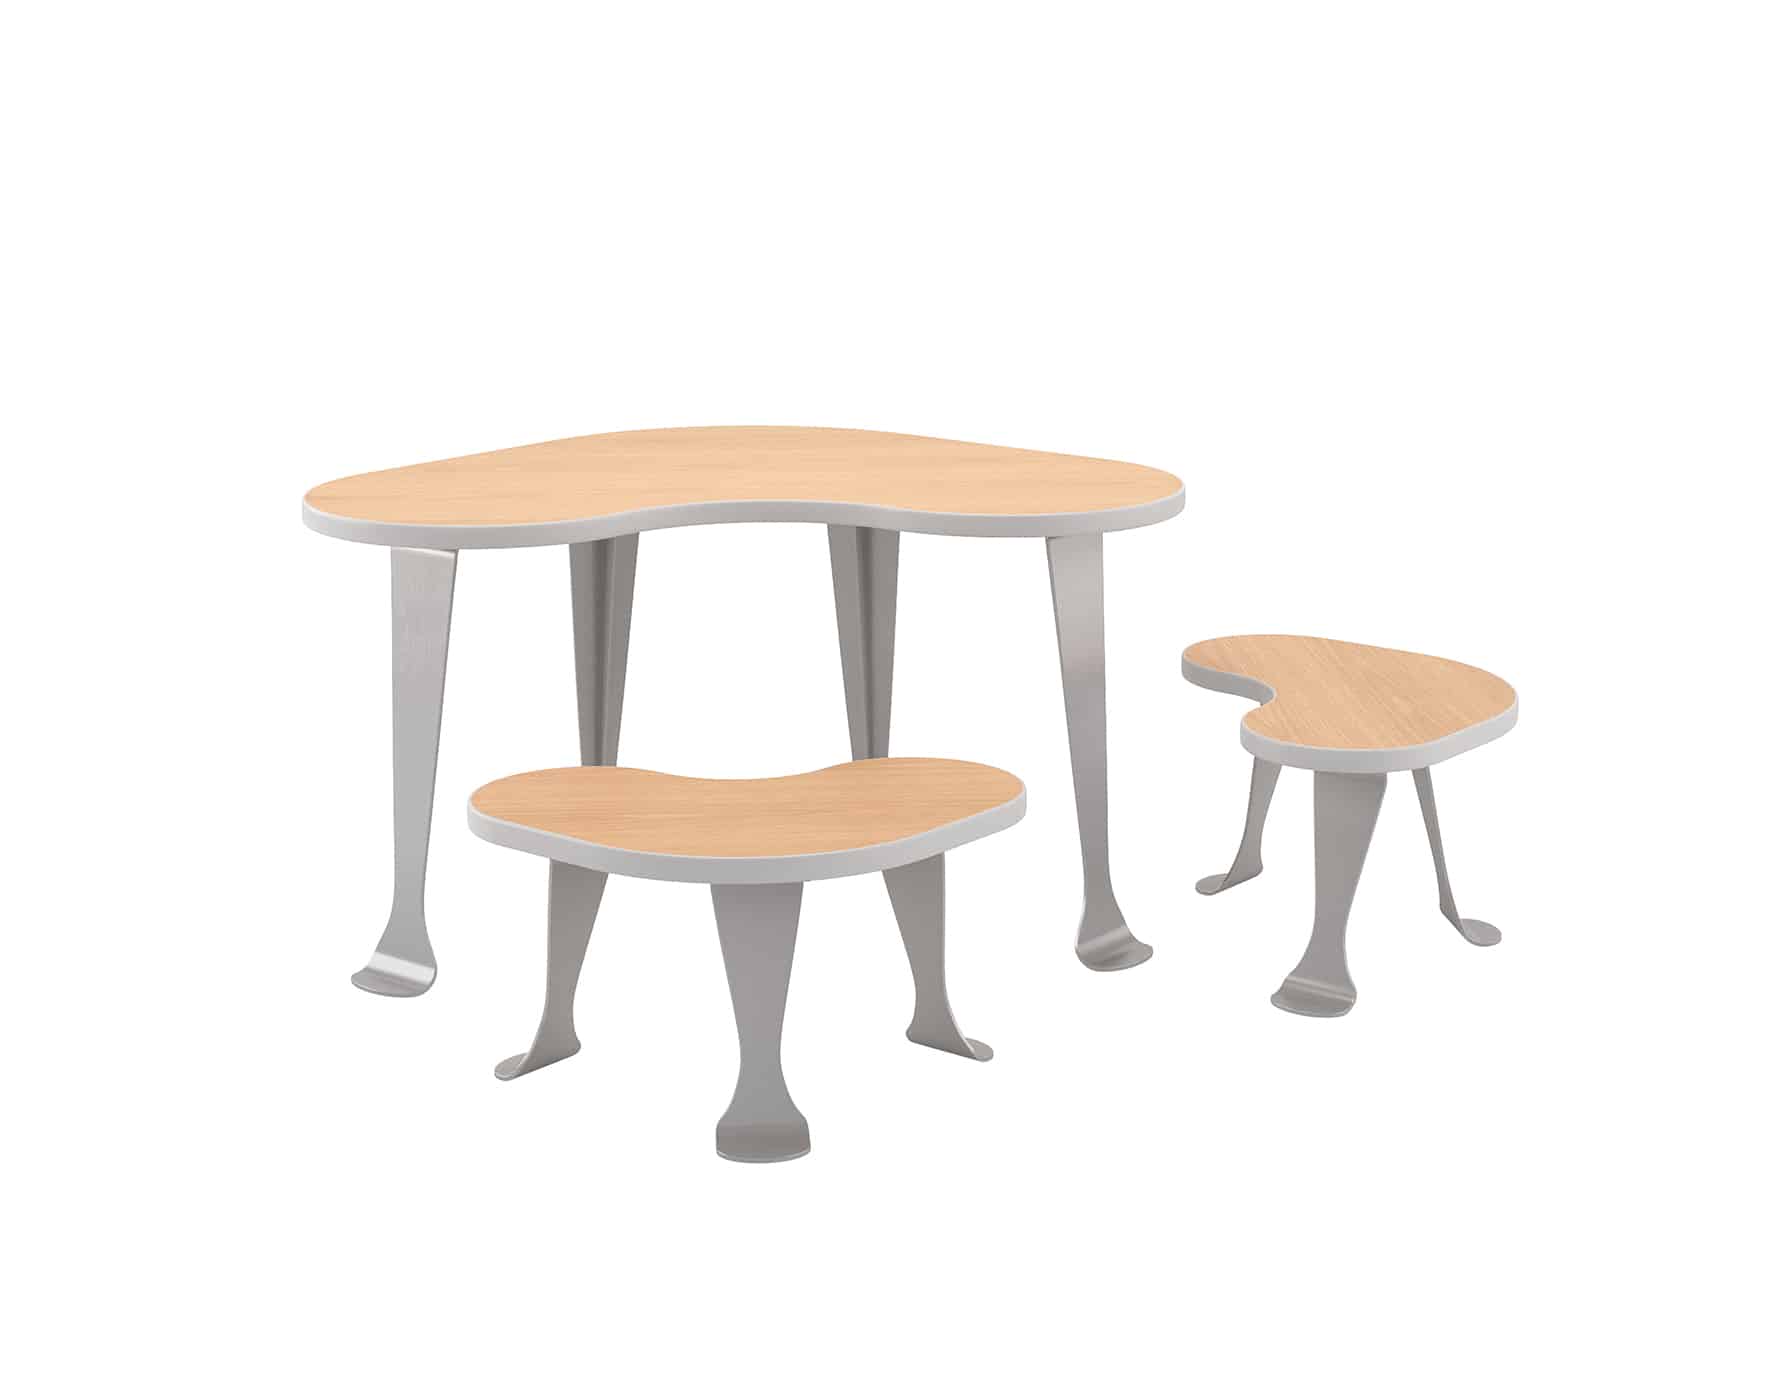 Sprout Children's Stool with Children's Table